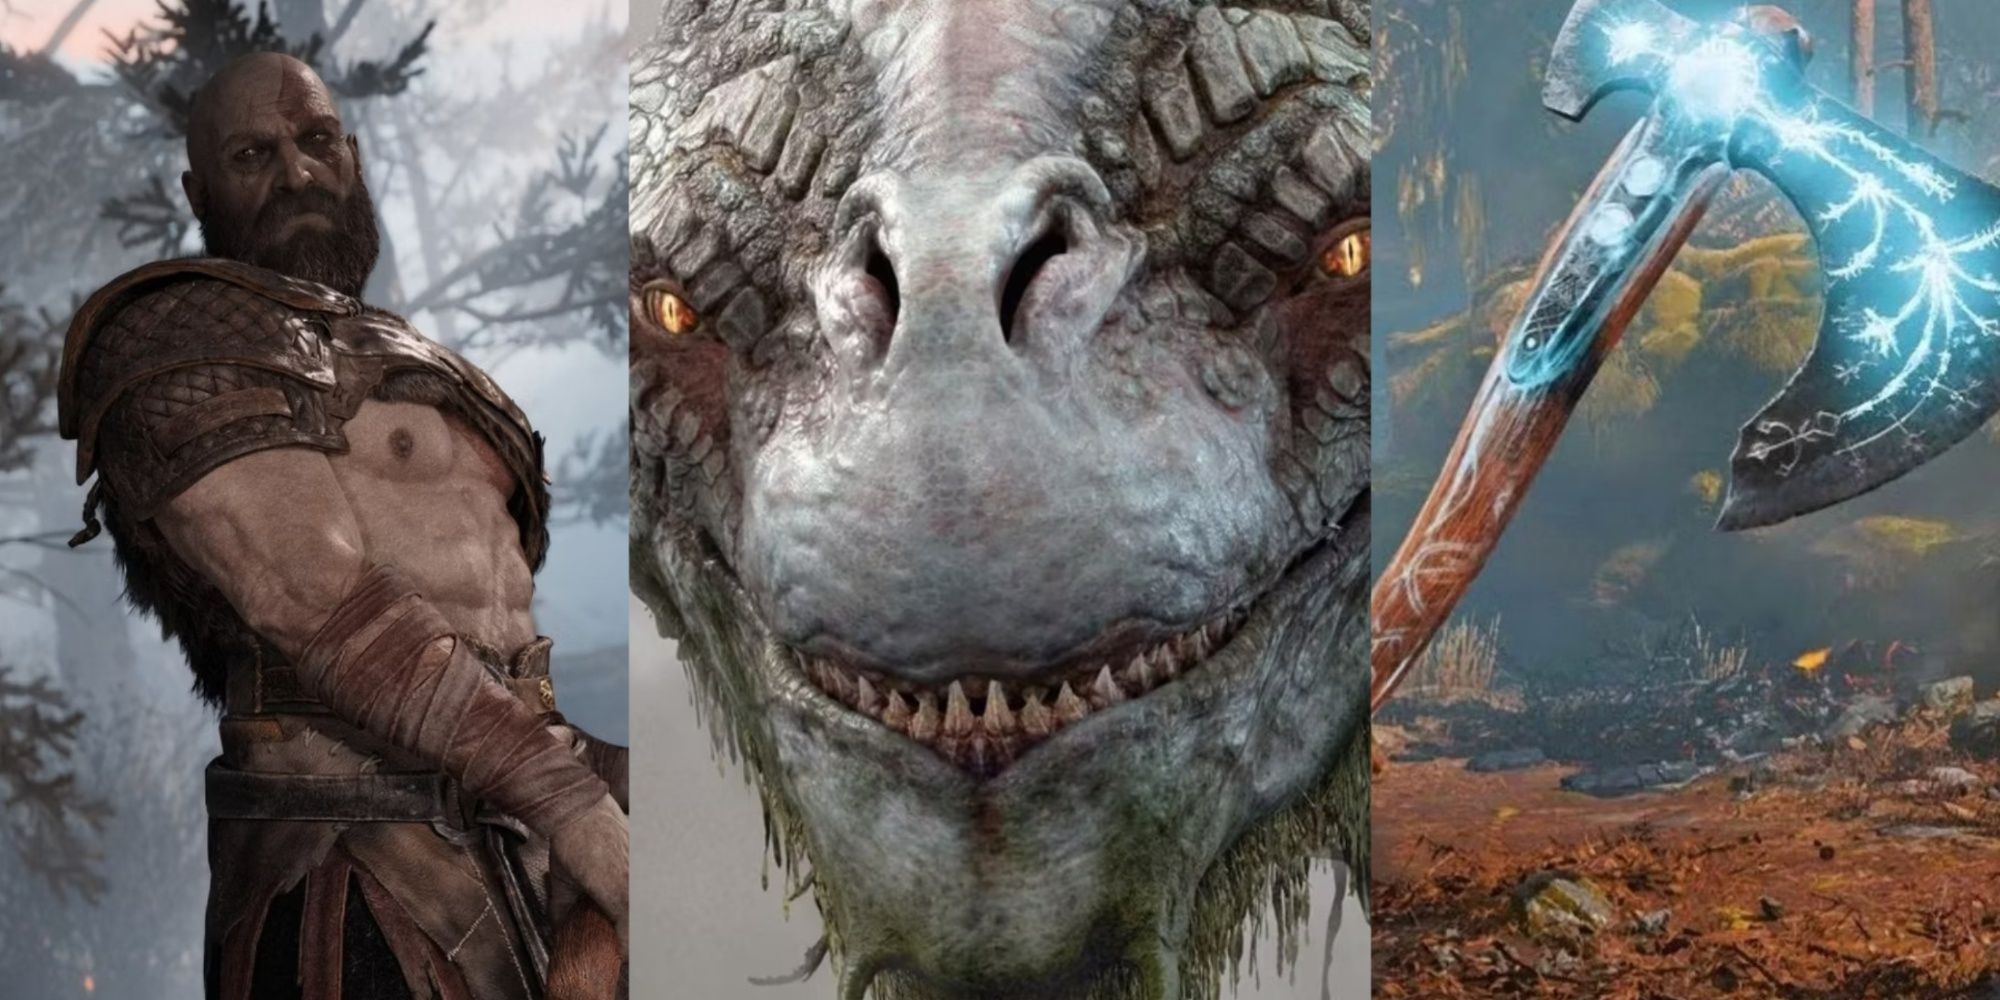 A collage of God Of War 2018's Kratos standing by a tree, a close-up of Jormungandr, and the Leviathan Axe.